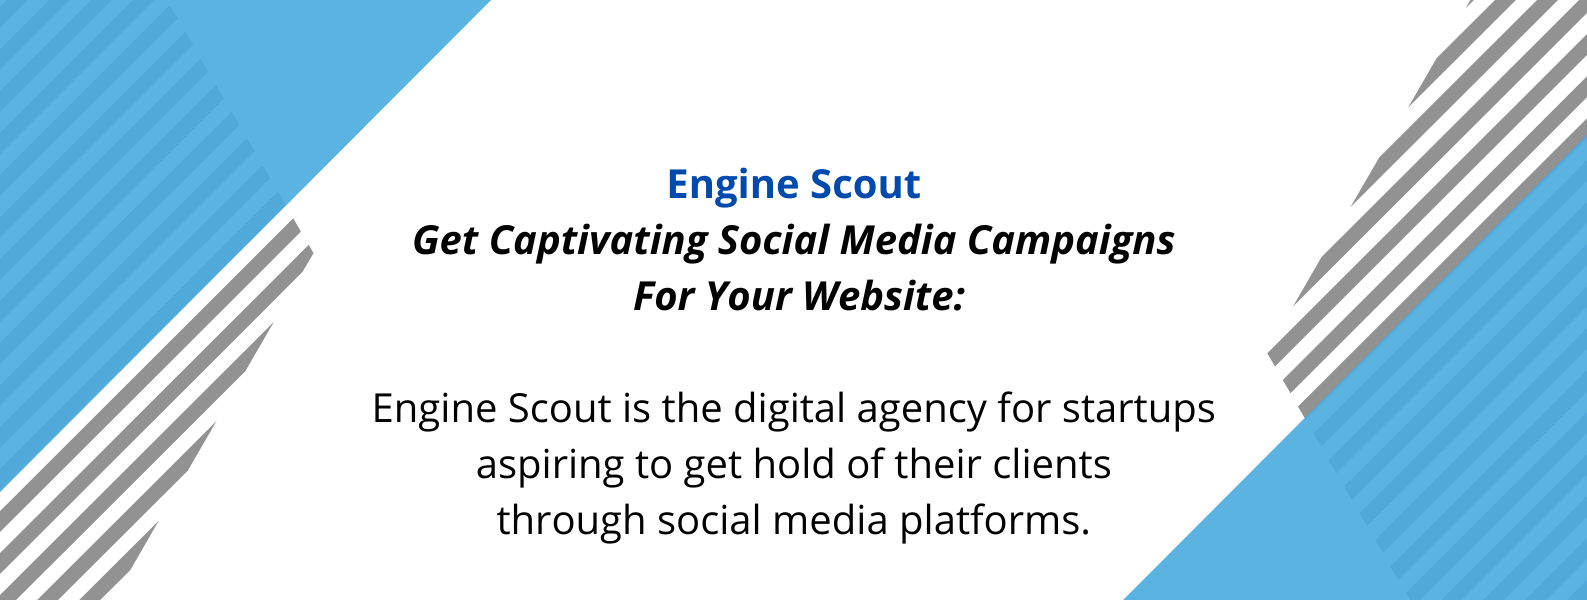 Unique selling proposition of Engine Scout - a digital marketing agency.